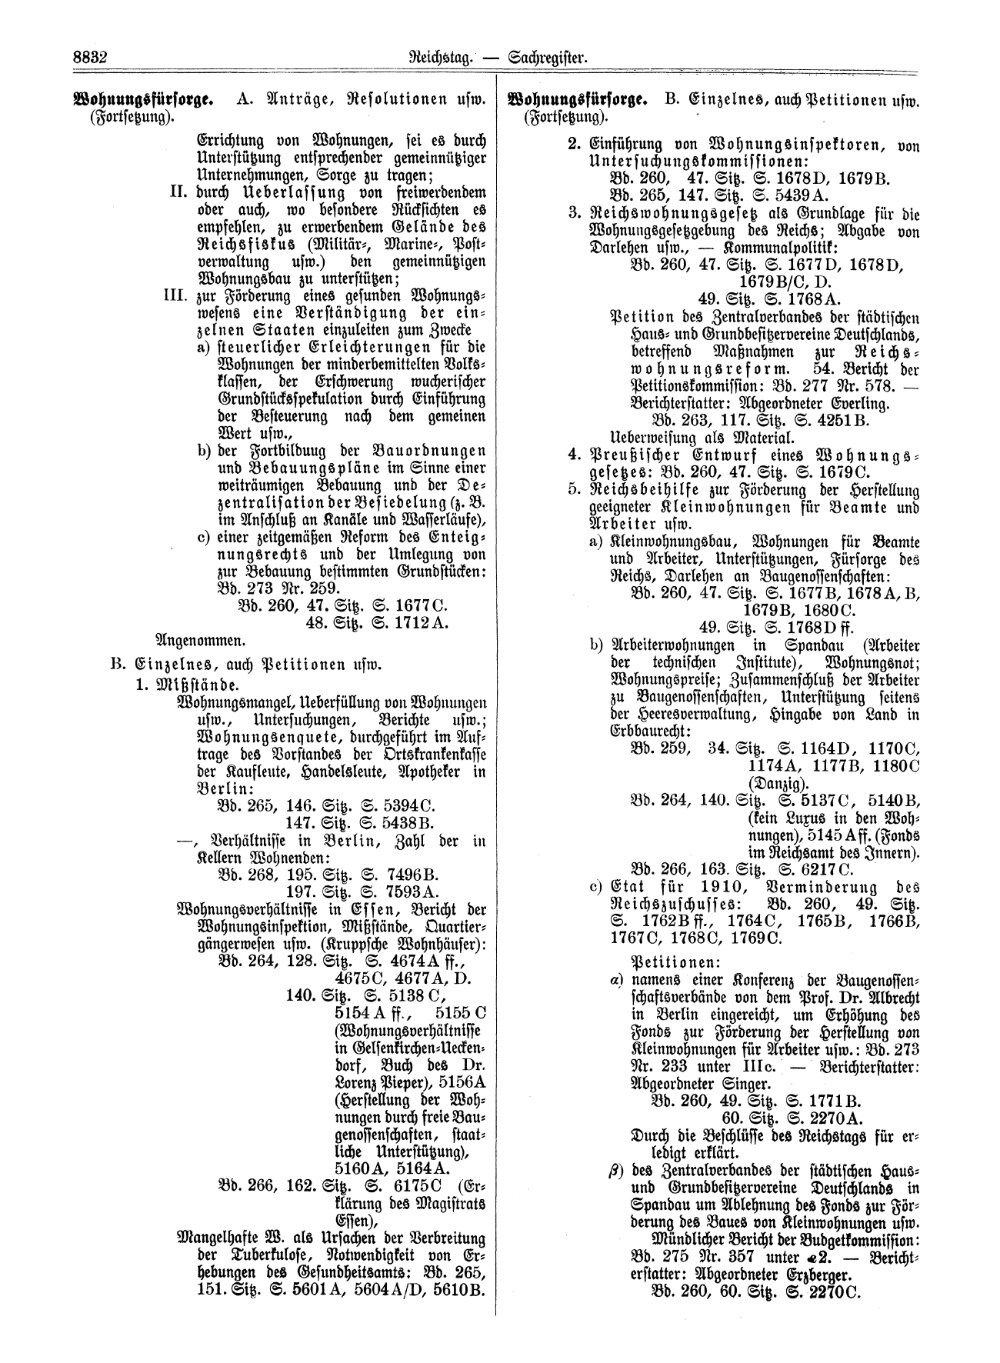 Scan of page 8832